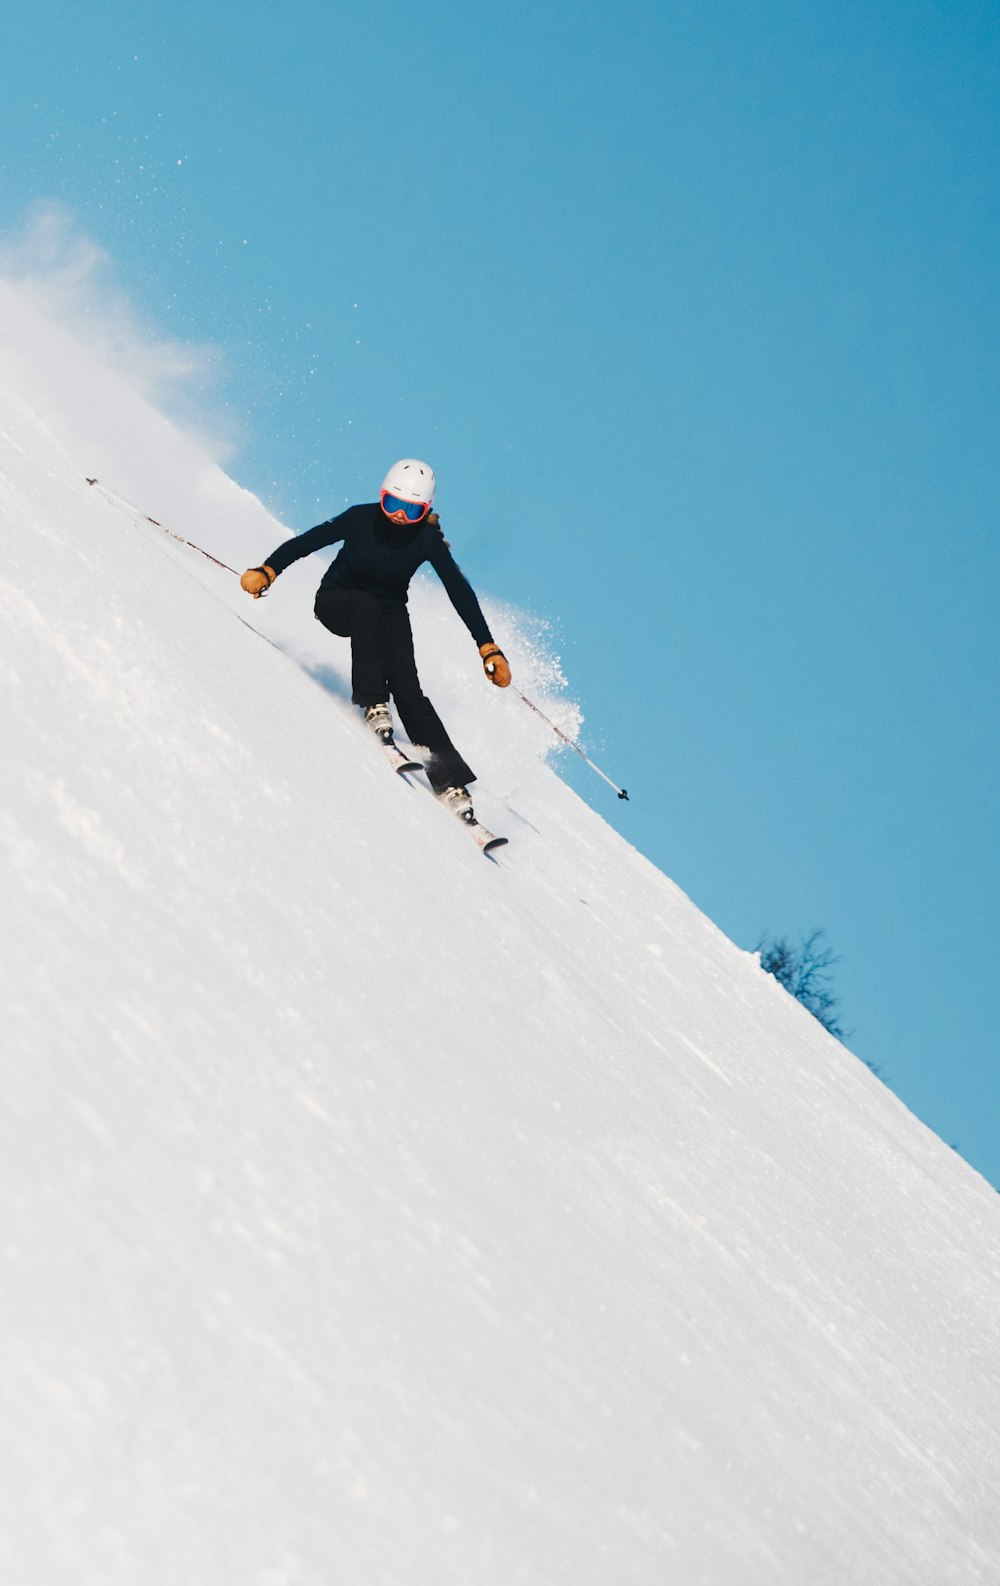 Downhill Skiing - What Are The Potential Health Benefits?